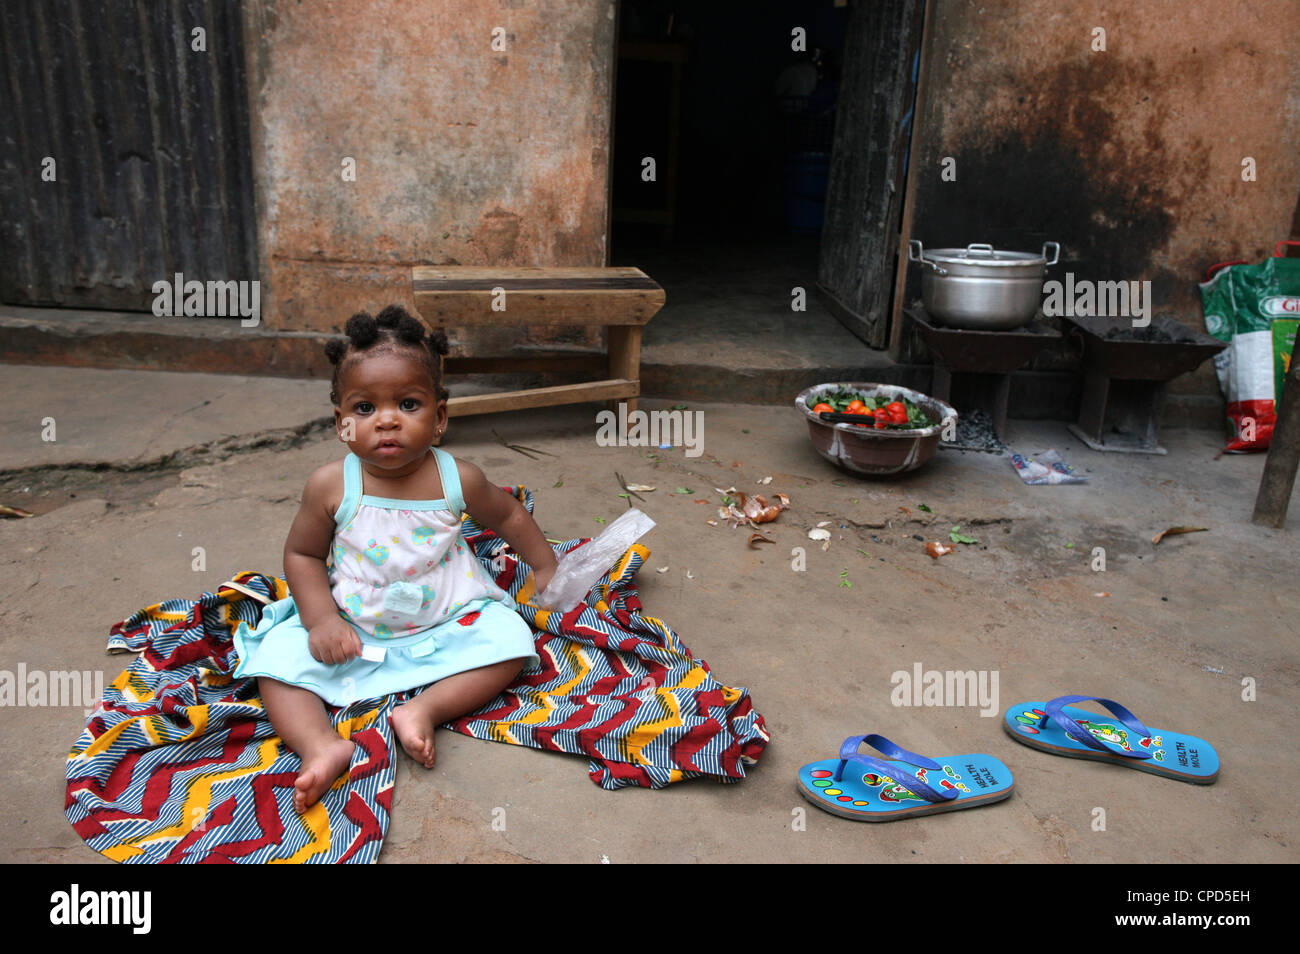 Bambino africano, a Lomé, Togo, Africa occidentale, Africa Foto Stock